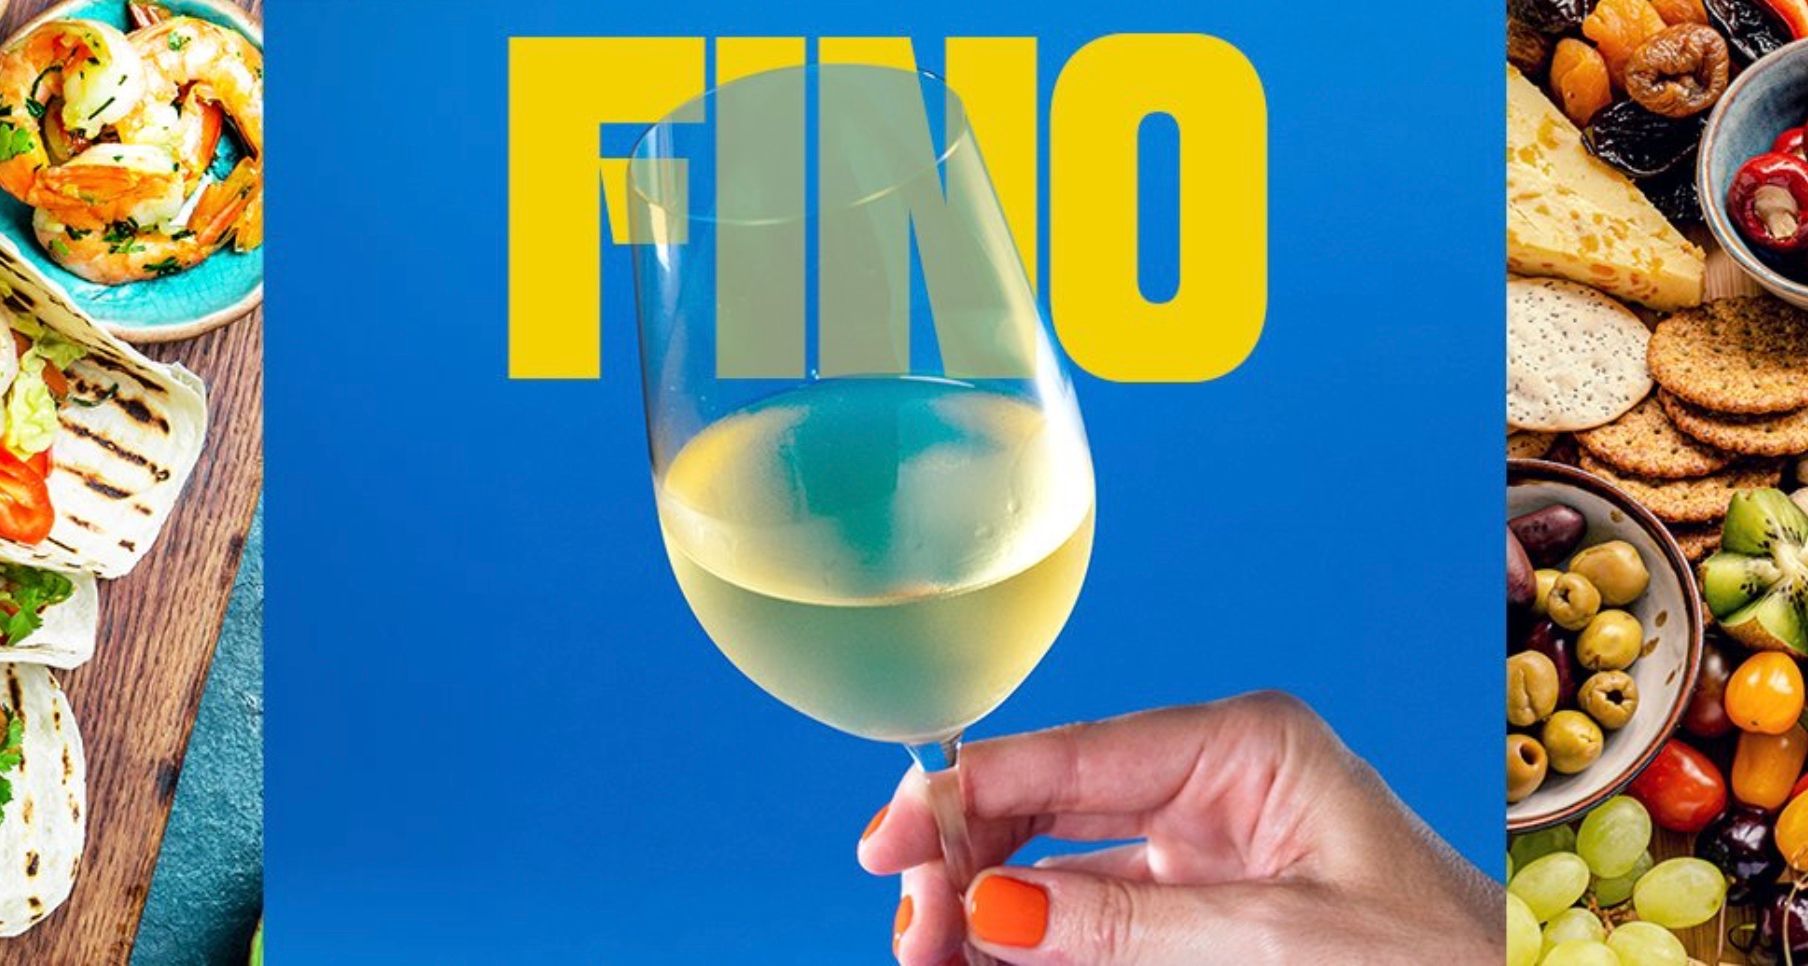 Fino 4 Foodies campaign looks to push Sherry into British summer